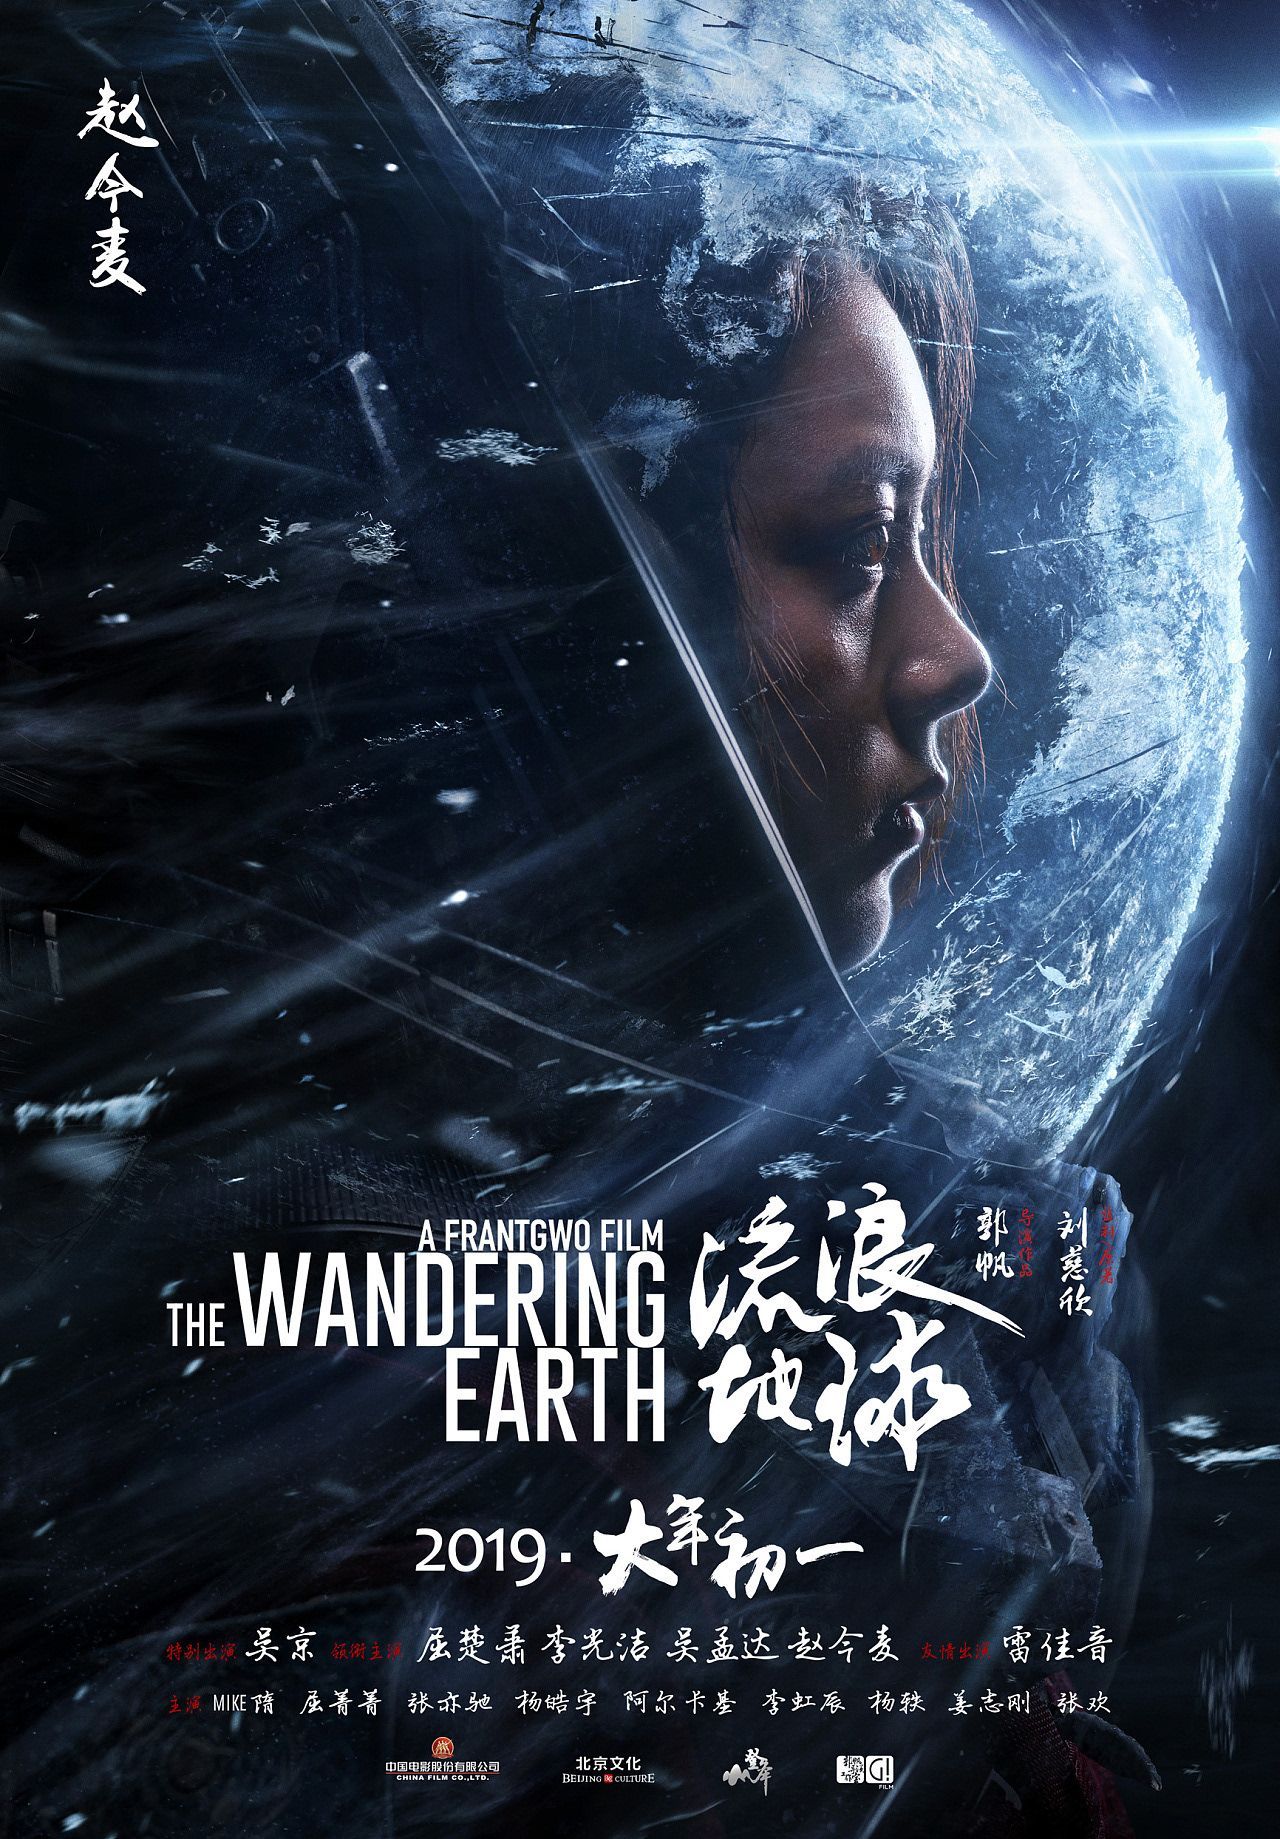 The Wandering Earth Sci Fi Film. Earth Movie, HD Movies Download, HD Movies